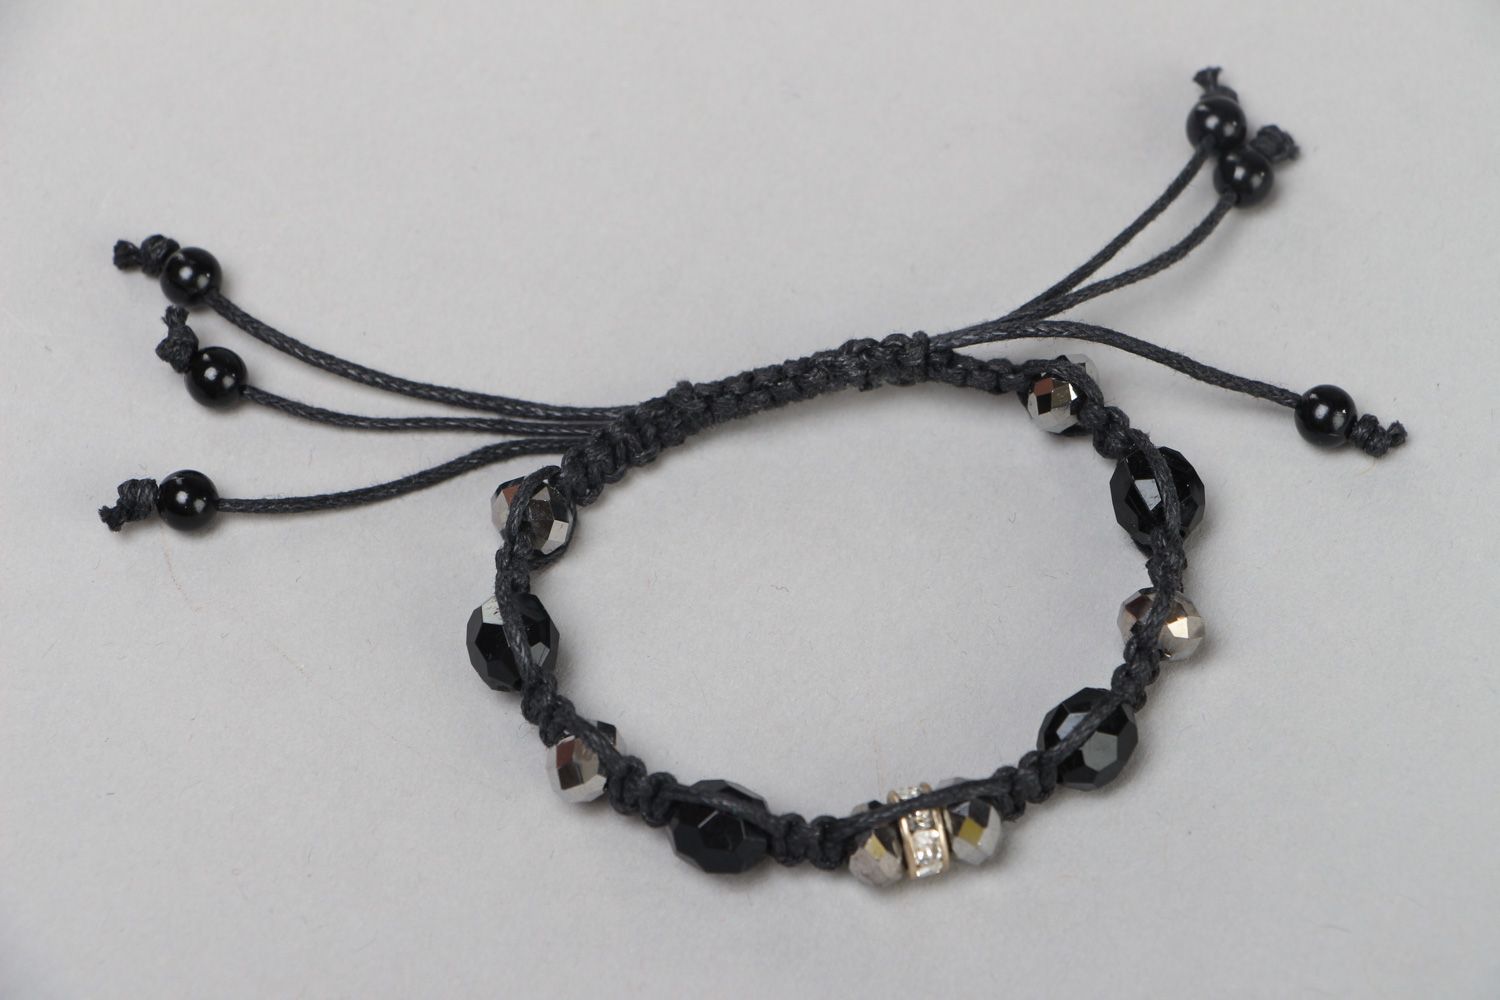 Handmade wrist bracelet woven of waxed cord with glass beads in dark color palette photo 1